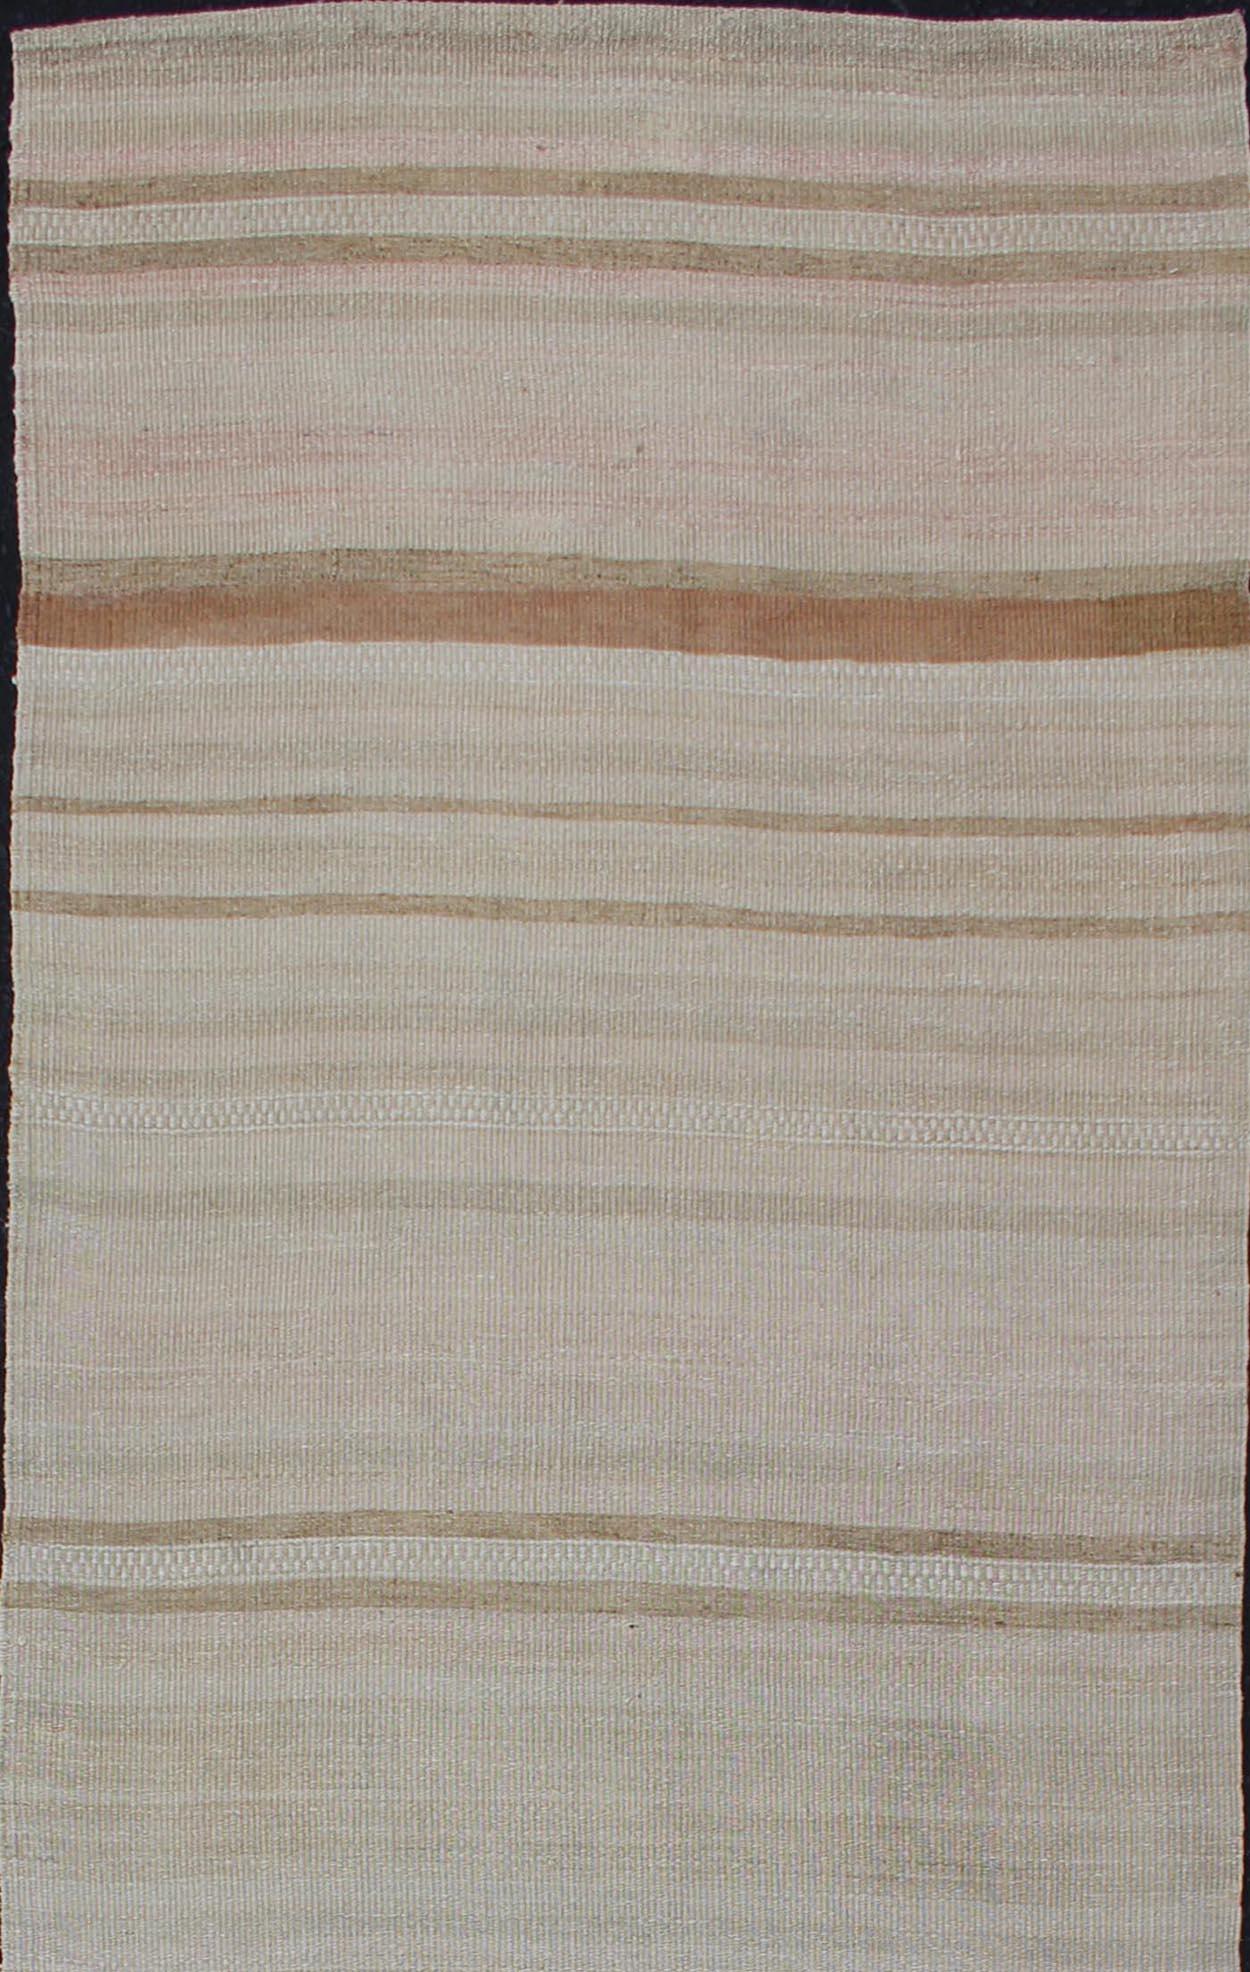 Stripe design Kilim runner in cream, light green, brown, rug EN-179080, country of origin / type: Turkey / Kilim, circa 1950

This flat-woven Kilim runner from Turkey features an exciting composition consisting of stripes rendered in natural tones